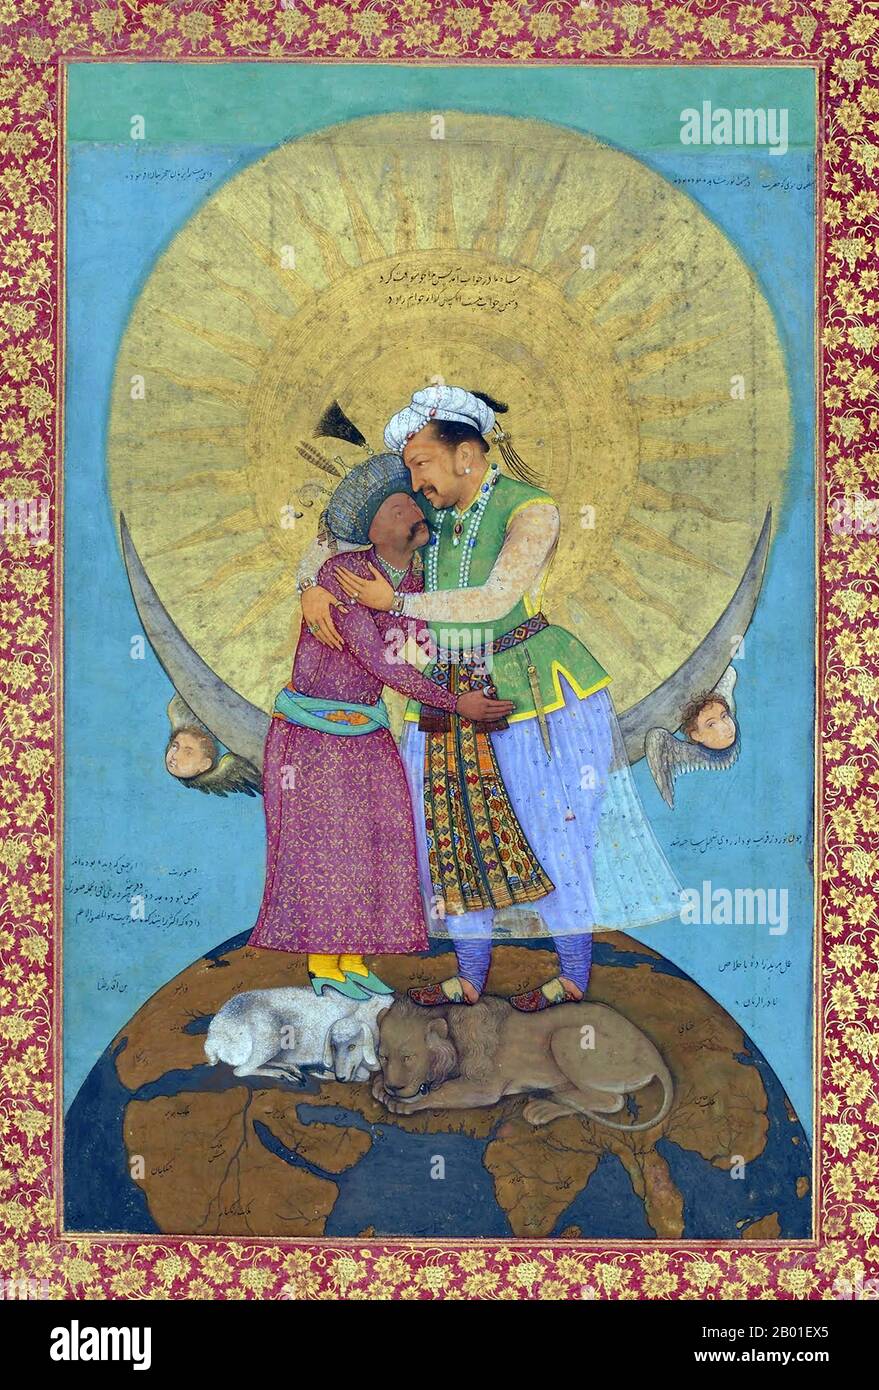 India/Iran/Persia: Emperor Jahangir of India (right) and Shah Abbas of Persia embrace in a symbolic representation of friendship between the Mughal and Safavid Empires. Watercolour painting by Abu al-Hasan (1589 - c. 1630), c. 1610s.  Jahangir (20 September 1569 - 8 November 1627) was the ruler of the Mughal Empire from 1605 until his death in 1627.  Shāh ‘Abbās the Great (27 January 1571 - 19 January 1629) was Shah (king) of Iran, and generally considered the greatest ruler of the Safavid dynasty. Stock Photo